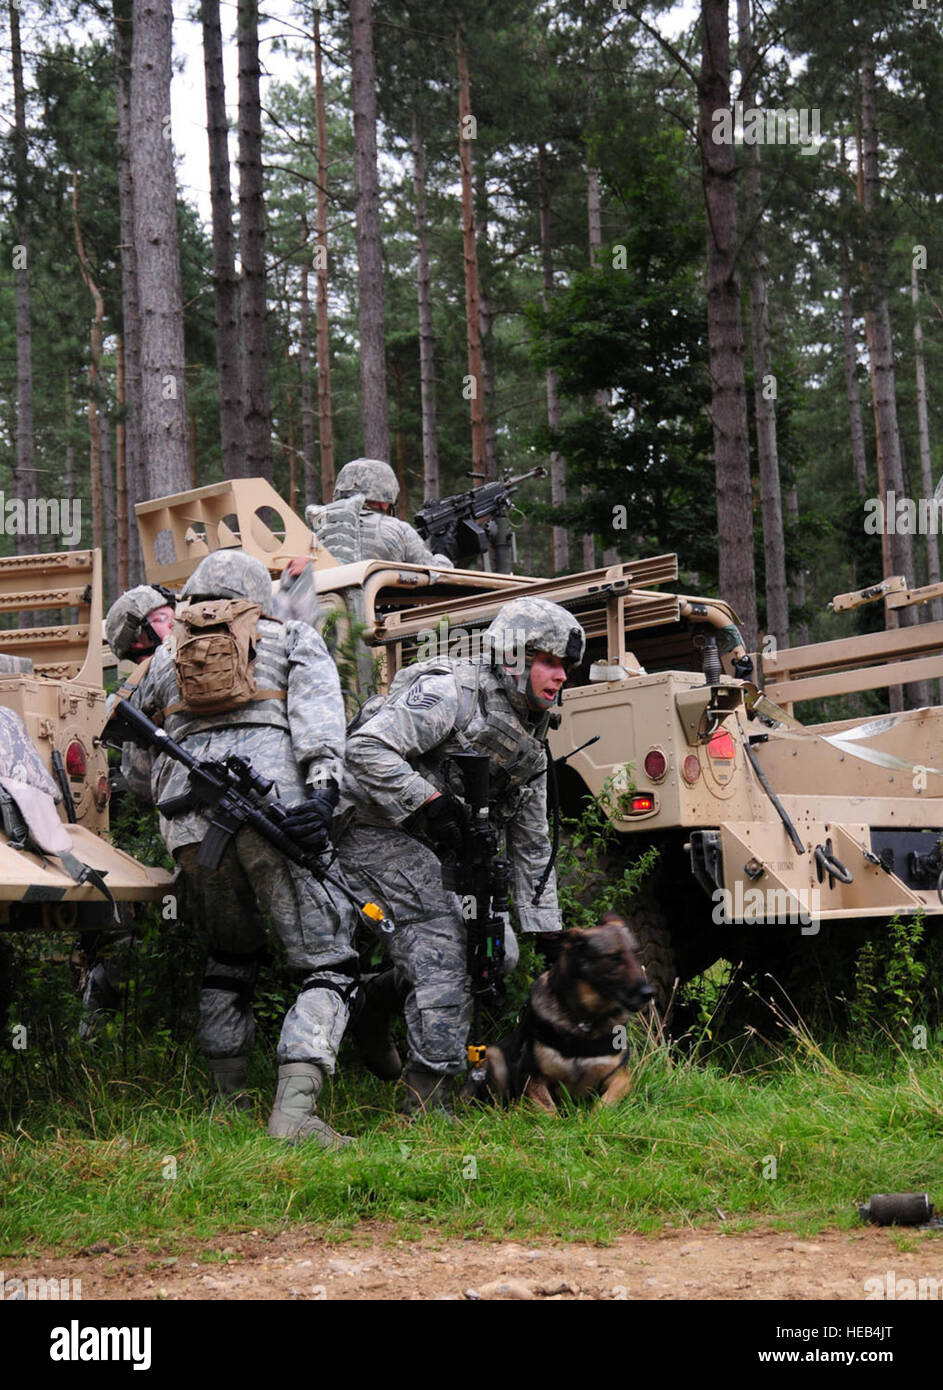 Members from the 100th Security Forces Squadron, including Military Working Dog Zulton, scramble to help wounded members of their team after they are ambushed during a training exercise at Stanford Training Area, Thetford, Sept. 4, 2012. The RAF Mildenhall members worked alongside Royal Air Force members from 15 Squadron, RAF Honington; No. 2 Tactical Police Squadron, RAF Henlow; and No. 7 Force Protection Wing Headquarters, RAF Coningsby, during a mission rehearsal exercise lasting several days. Forty 100th SFS members and two military working dogs played the role of the U.S. Marine Corps, he Stock Photo